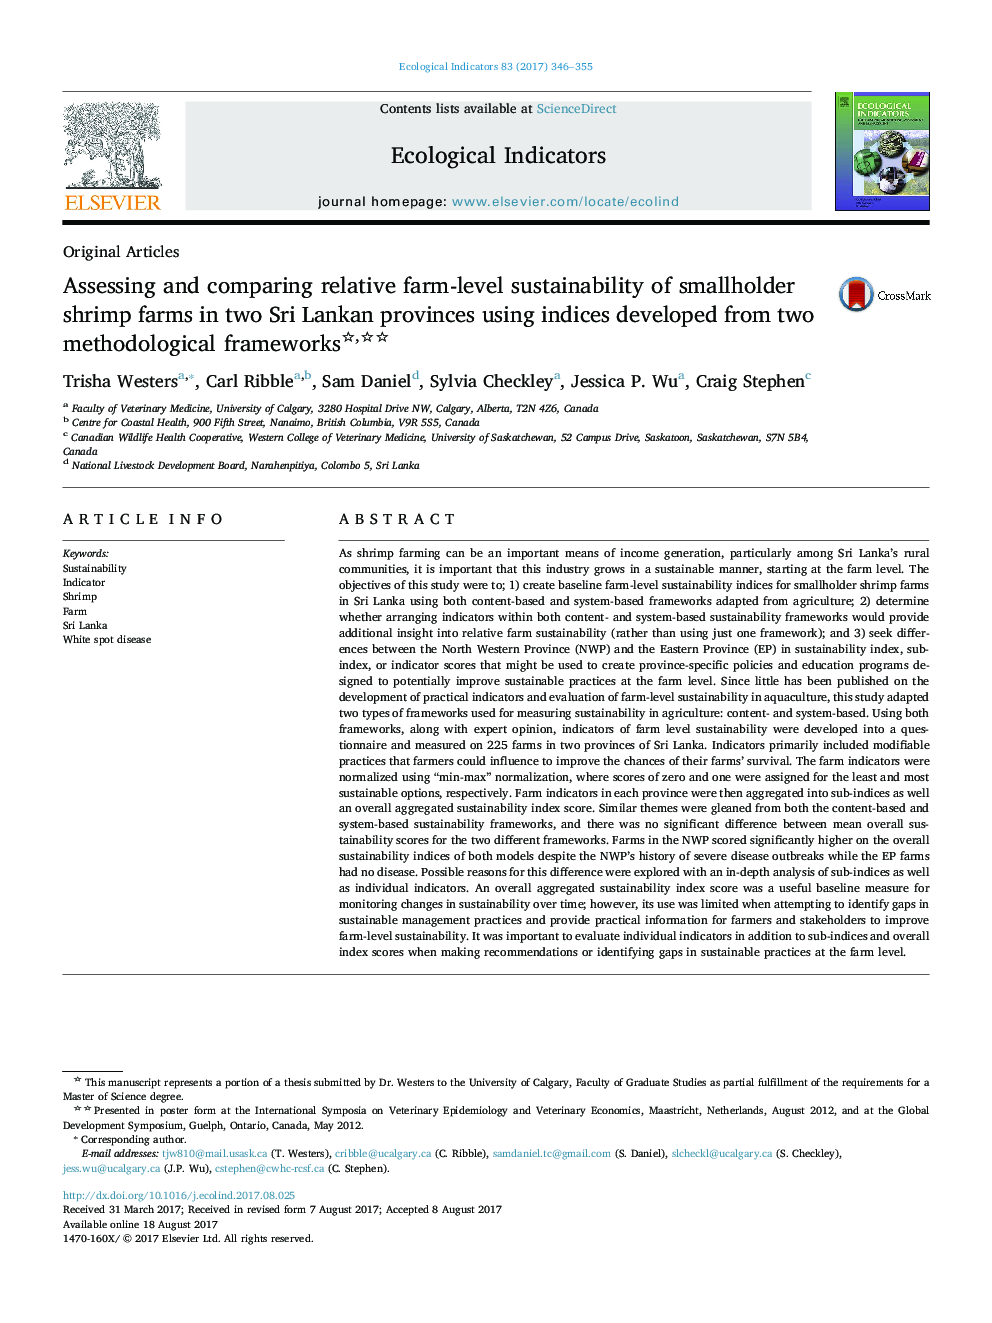 Original ArticlesAssessing and comparing relative farm-level sustainability of smallholder shrimp farms in two Sri Lankan provinces using indices developed from two methodological frameworks